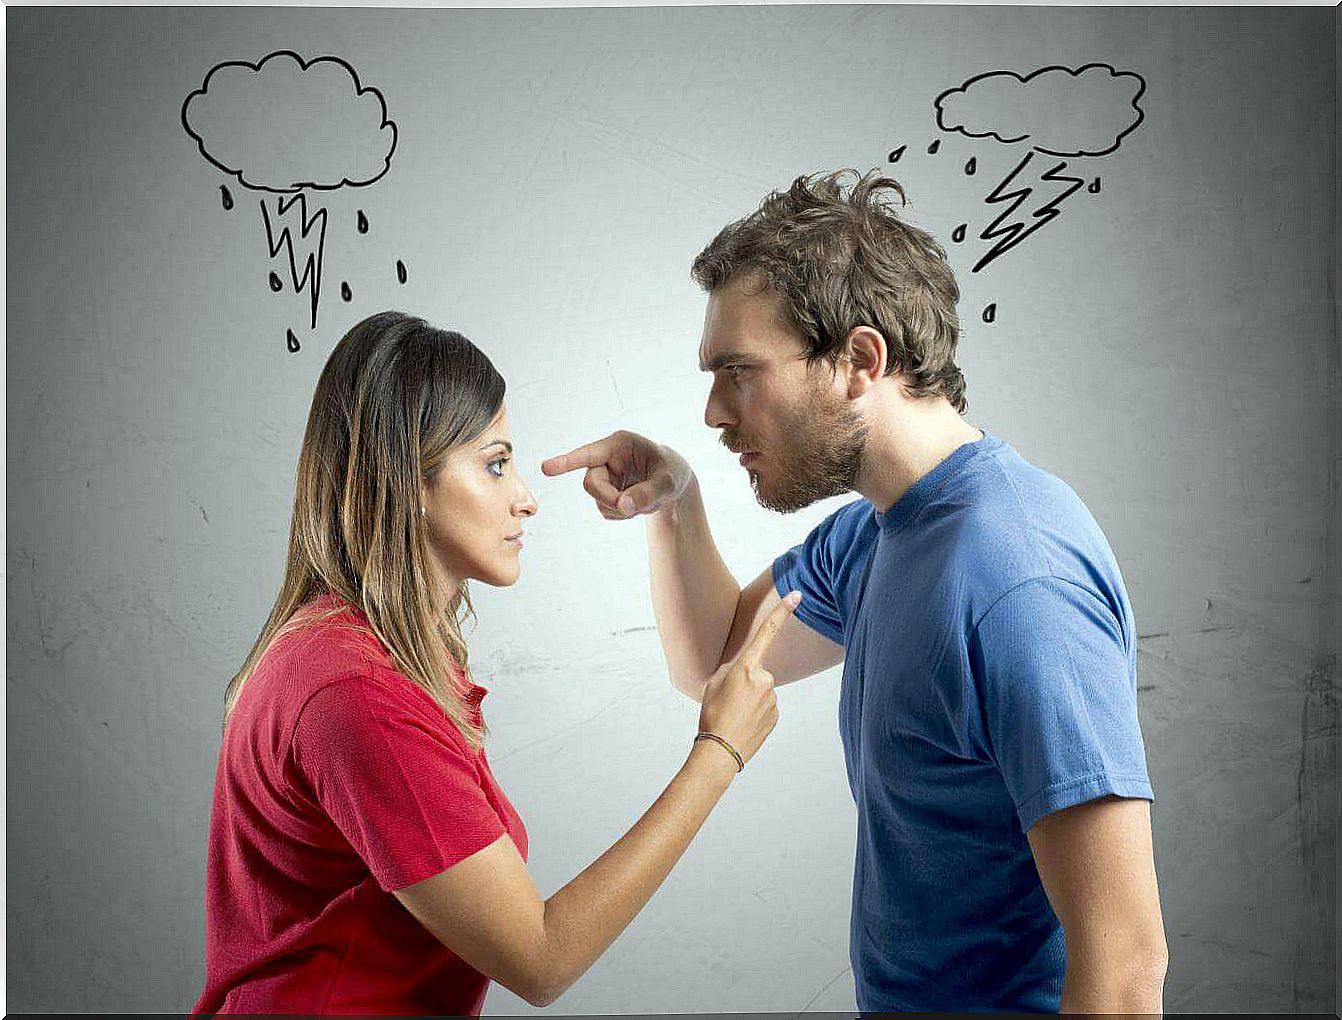 phrases to avoid saying to your partner